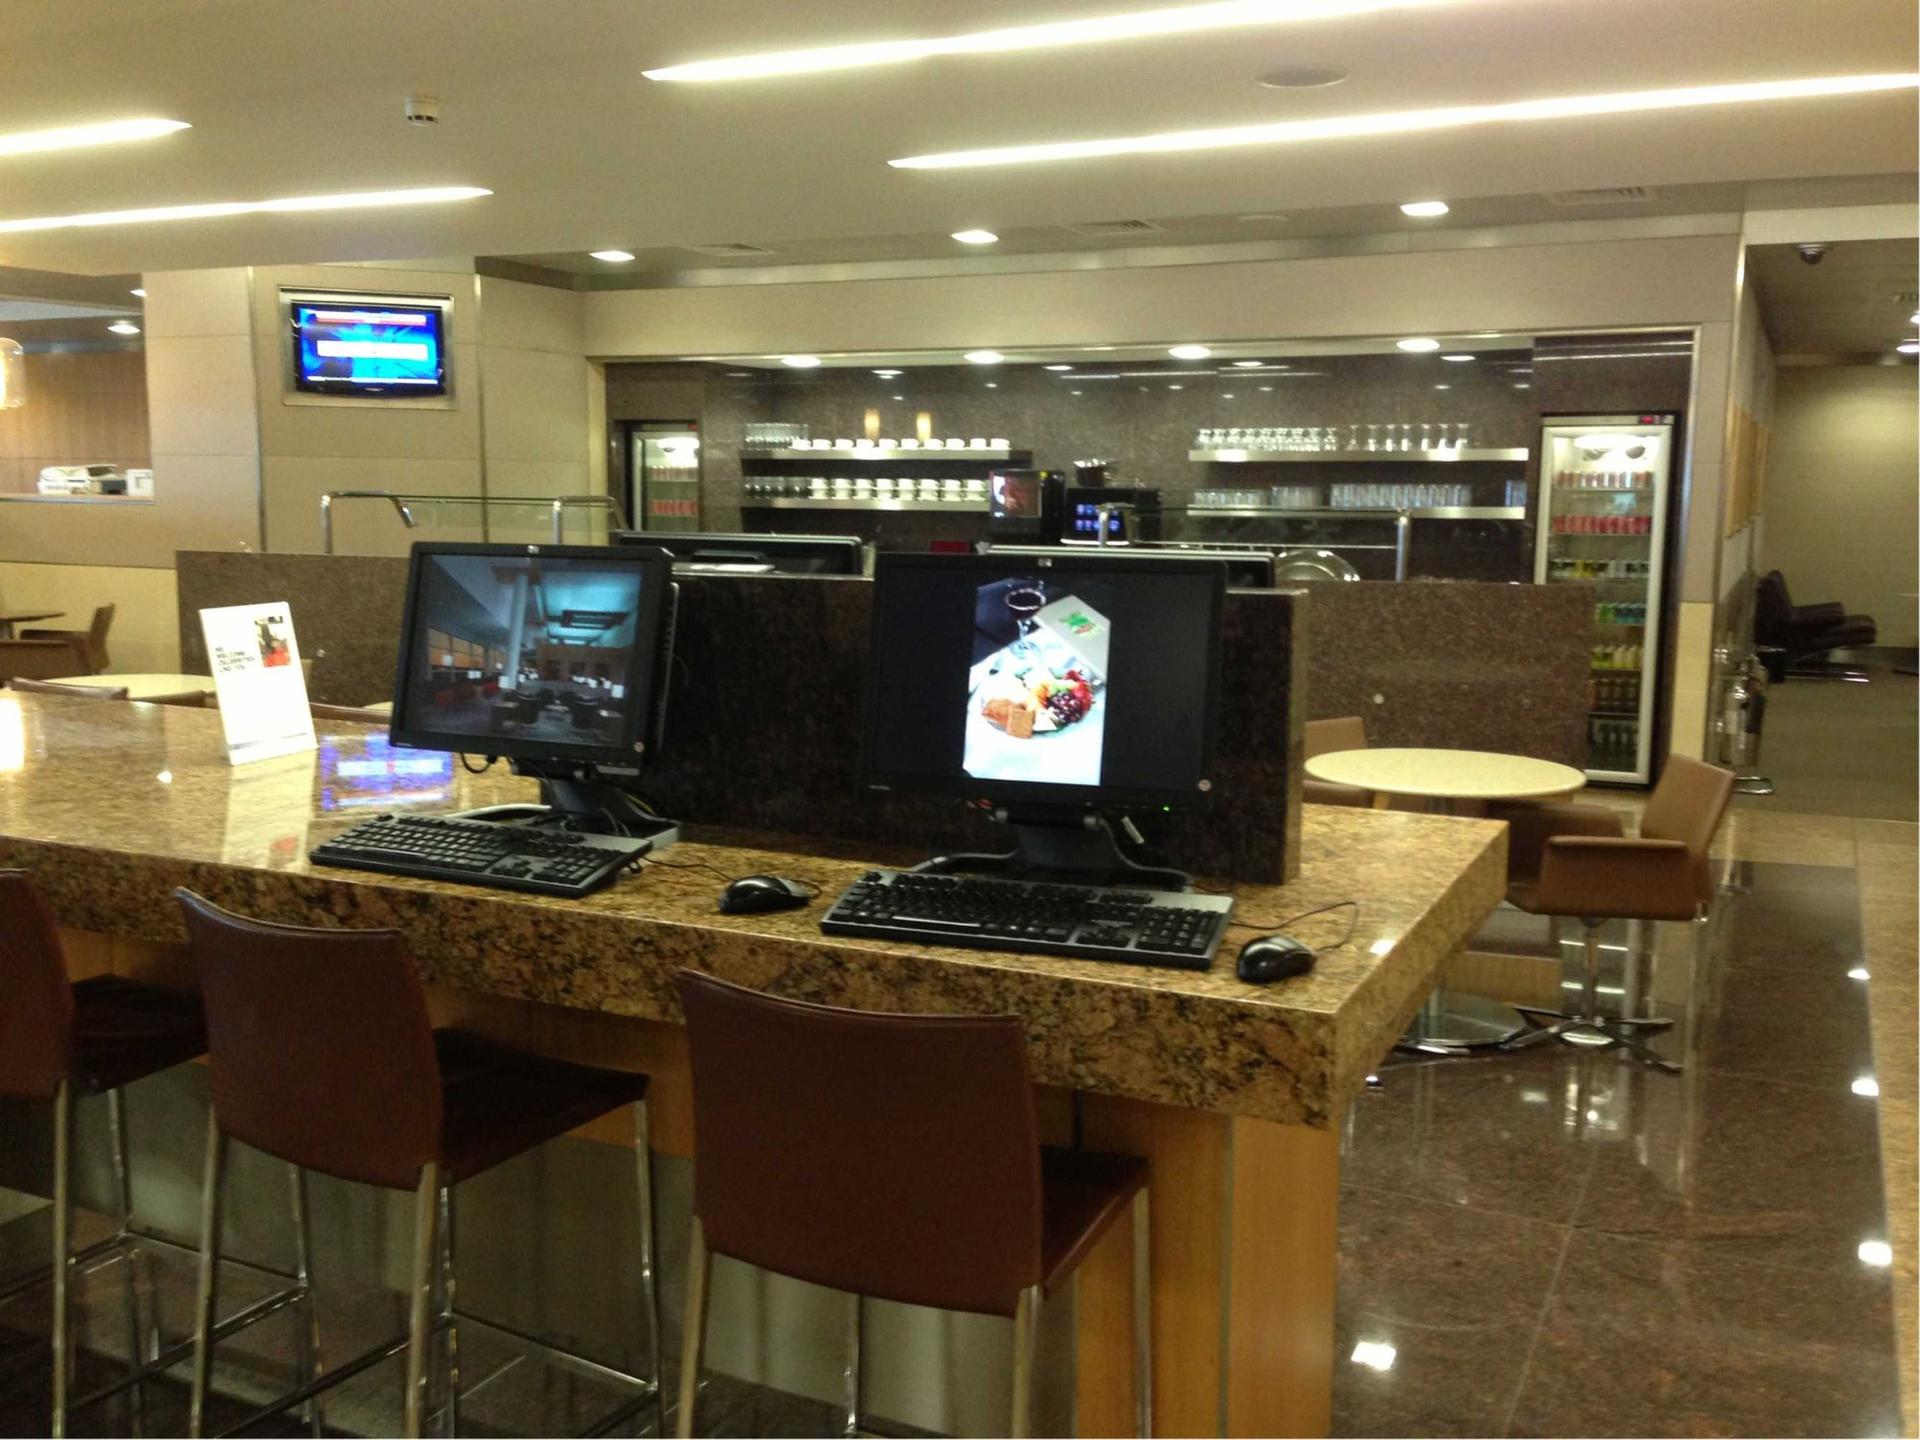 American Airlines International First Class Lounge image 8 of 16